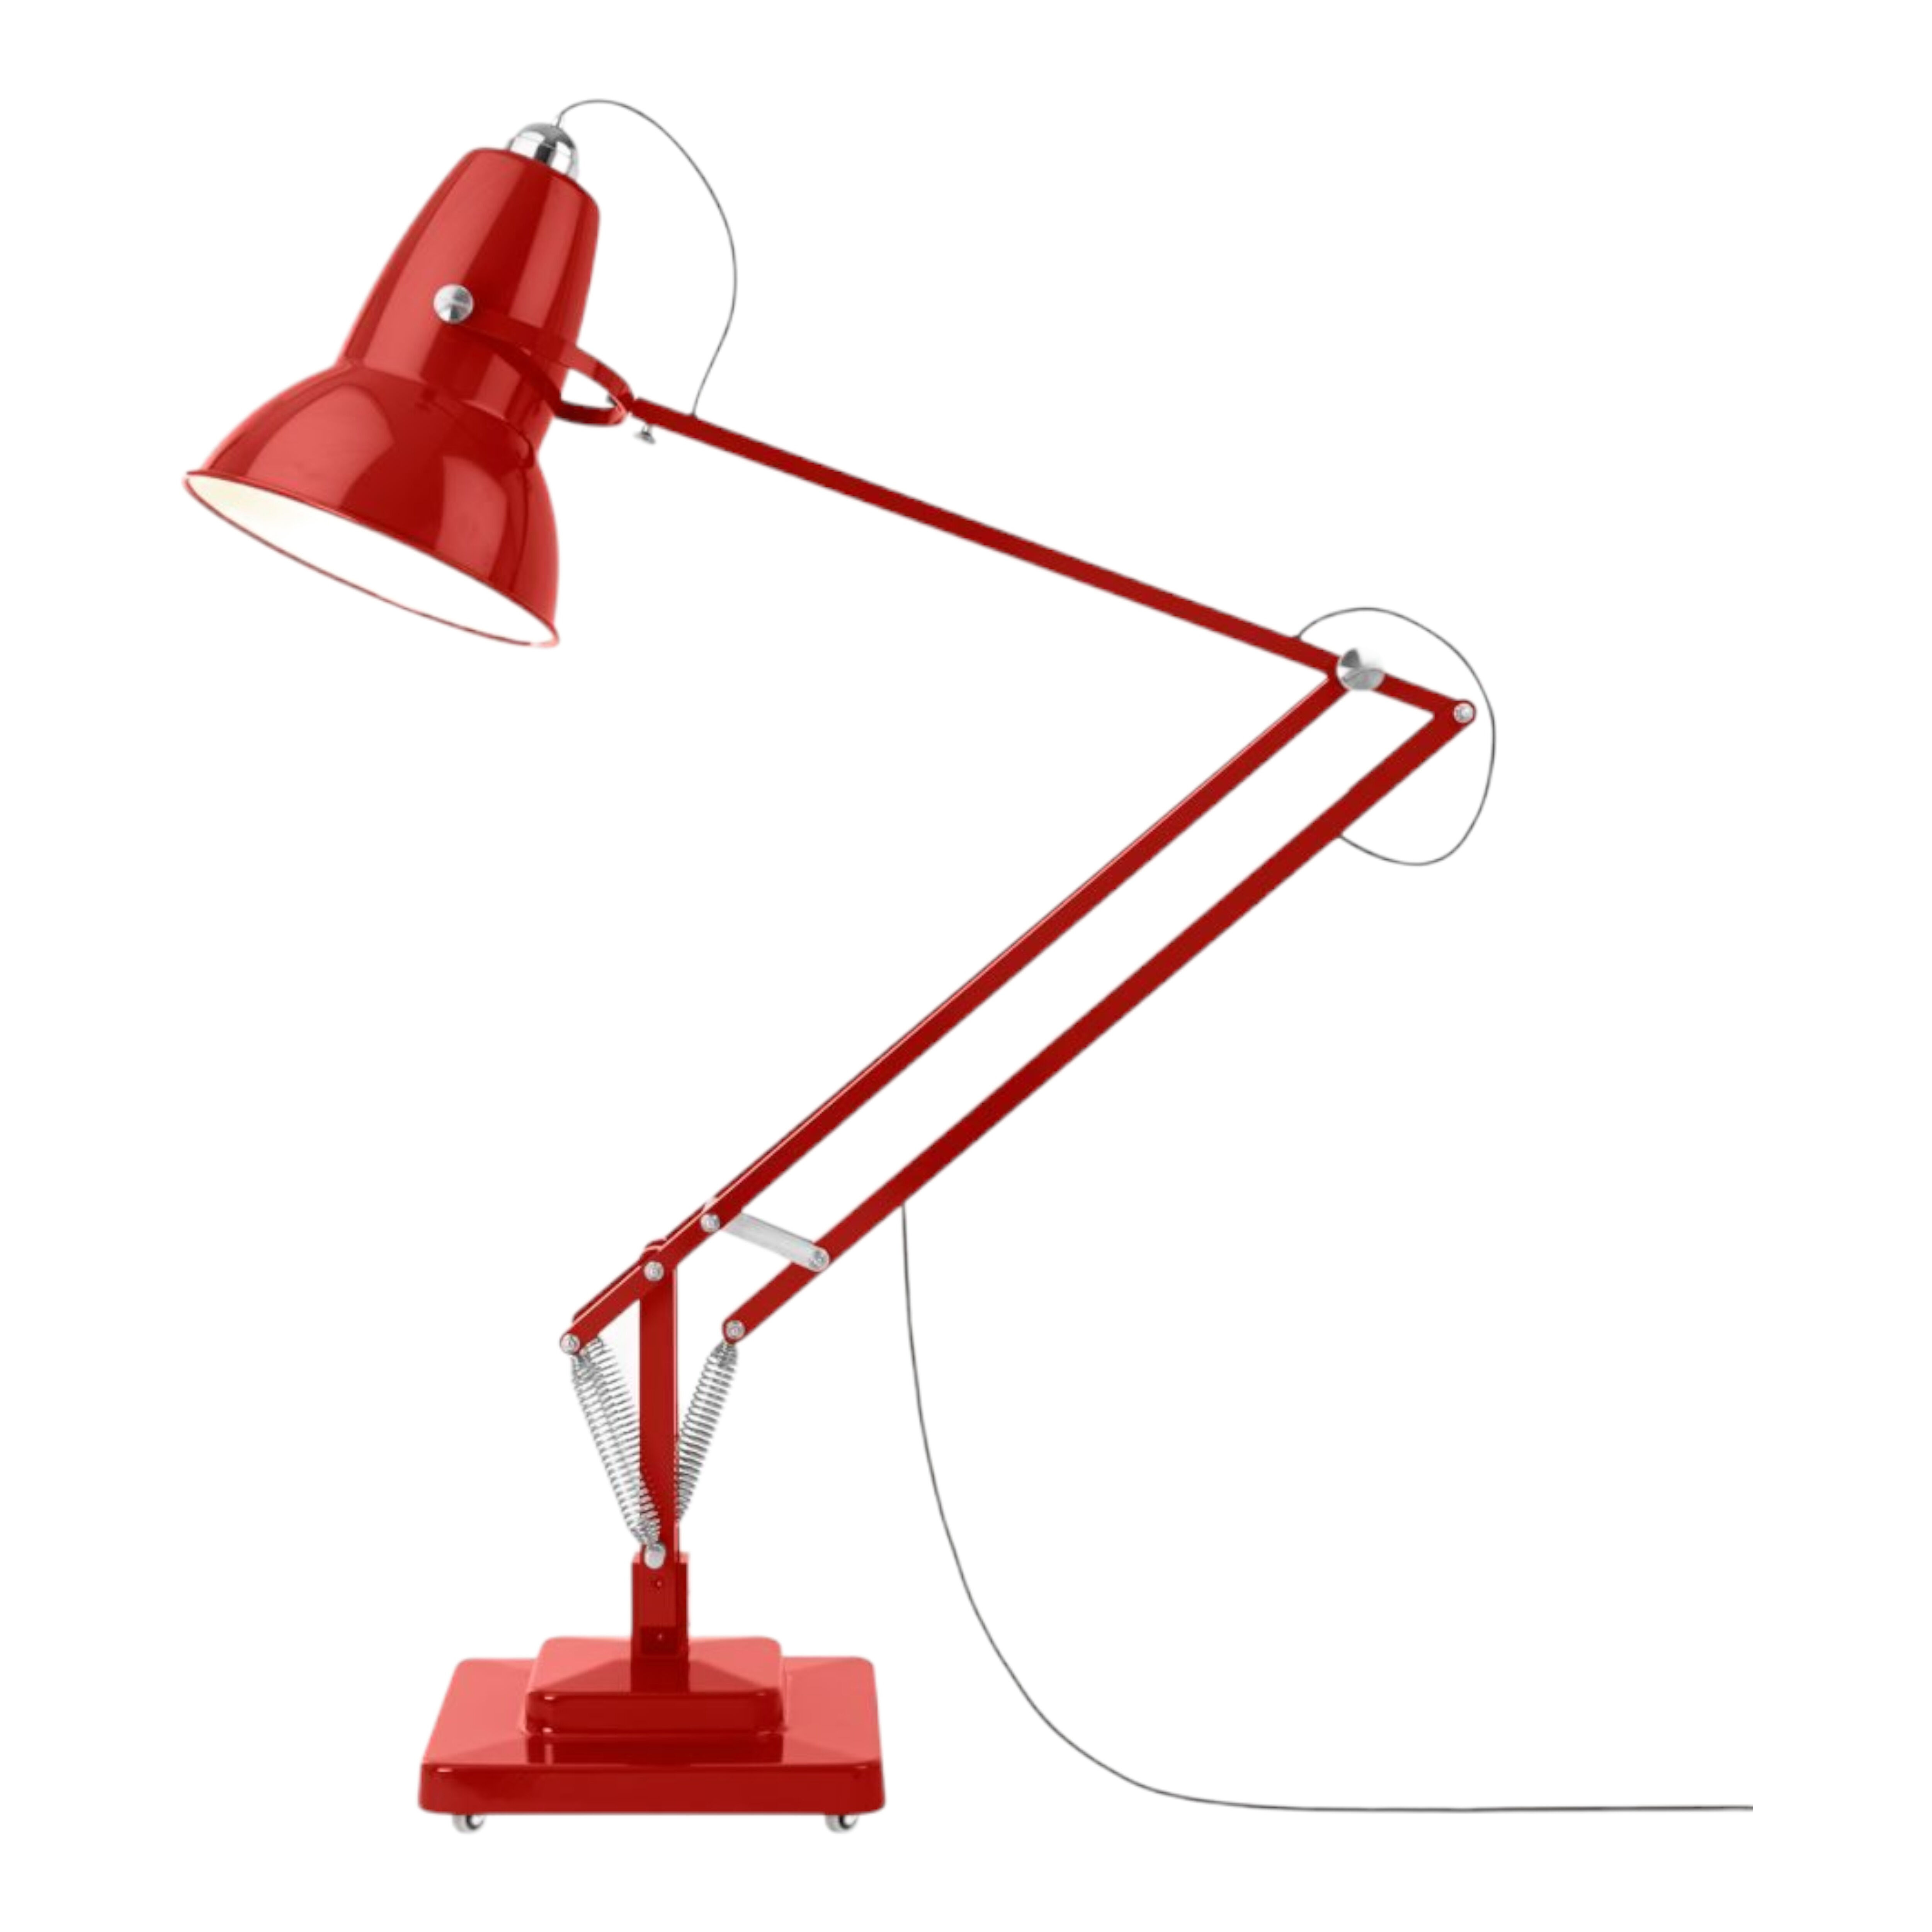 Stehleuchte Anglepoise Original Giant Outdoor 31903 Farbe Crimson Rot 3001